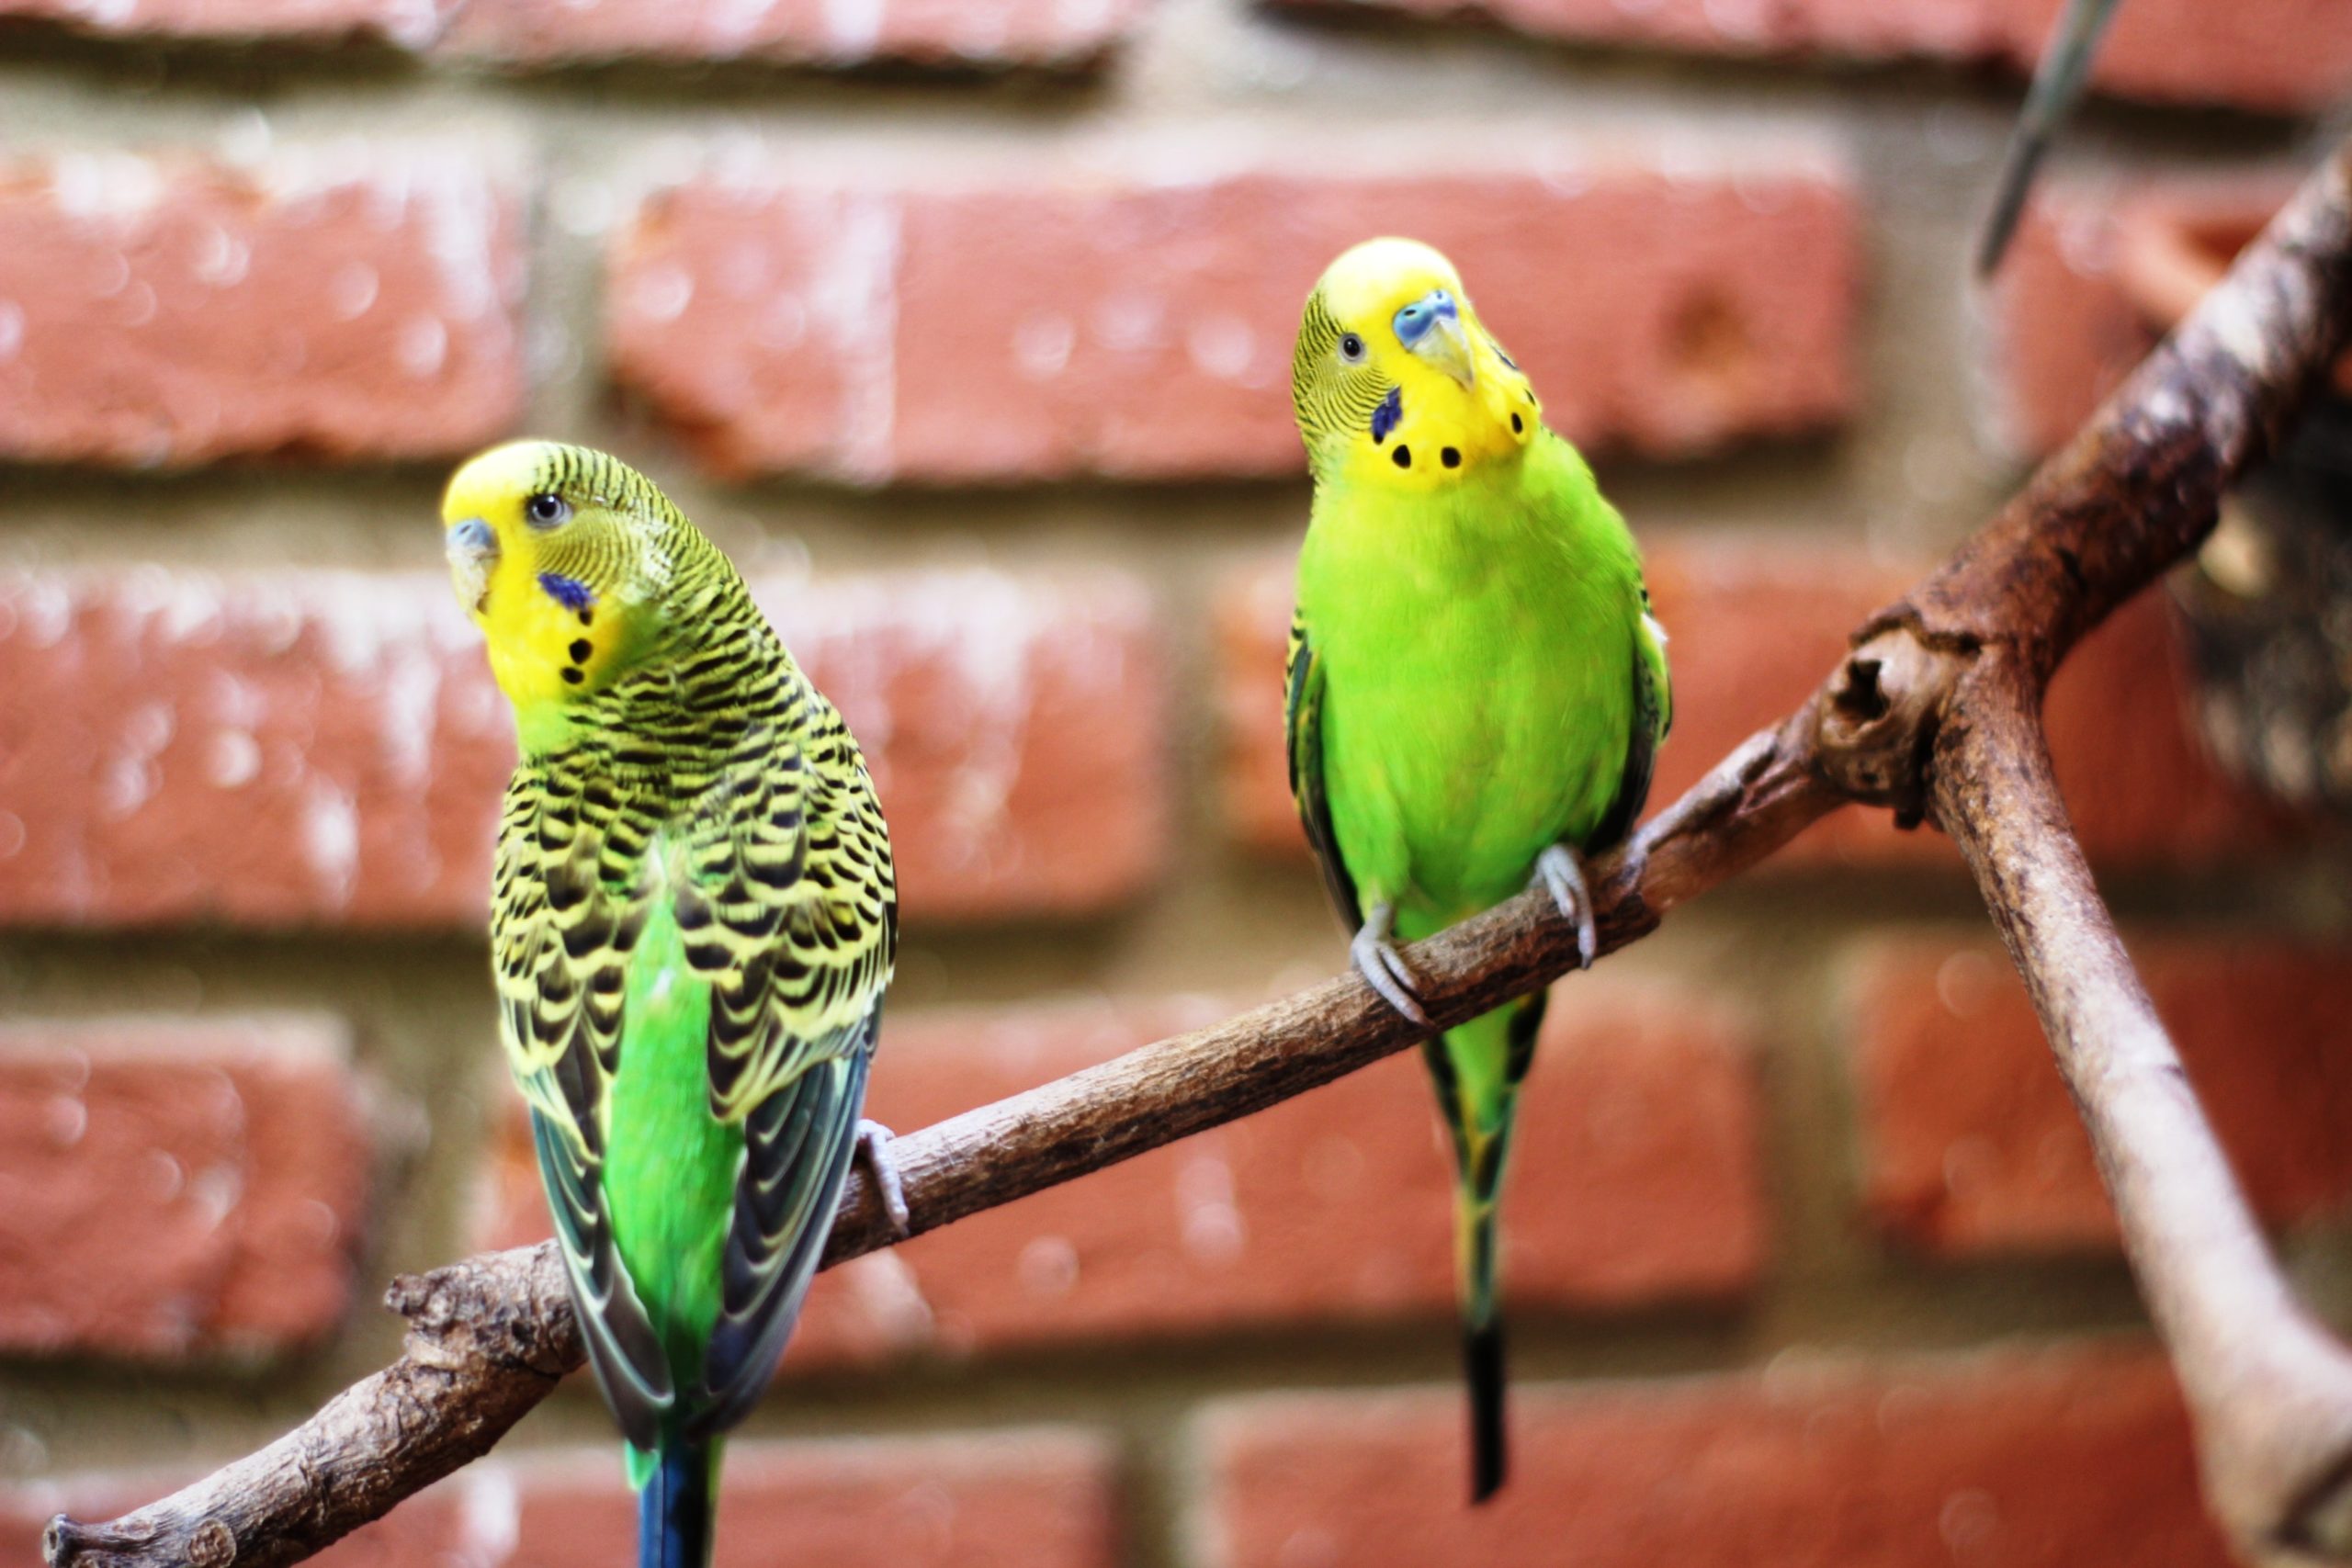 10 Tips on How to Care for Your Pet Bird